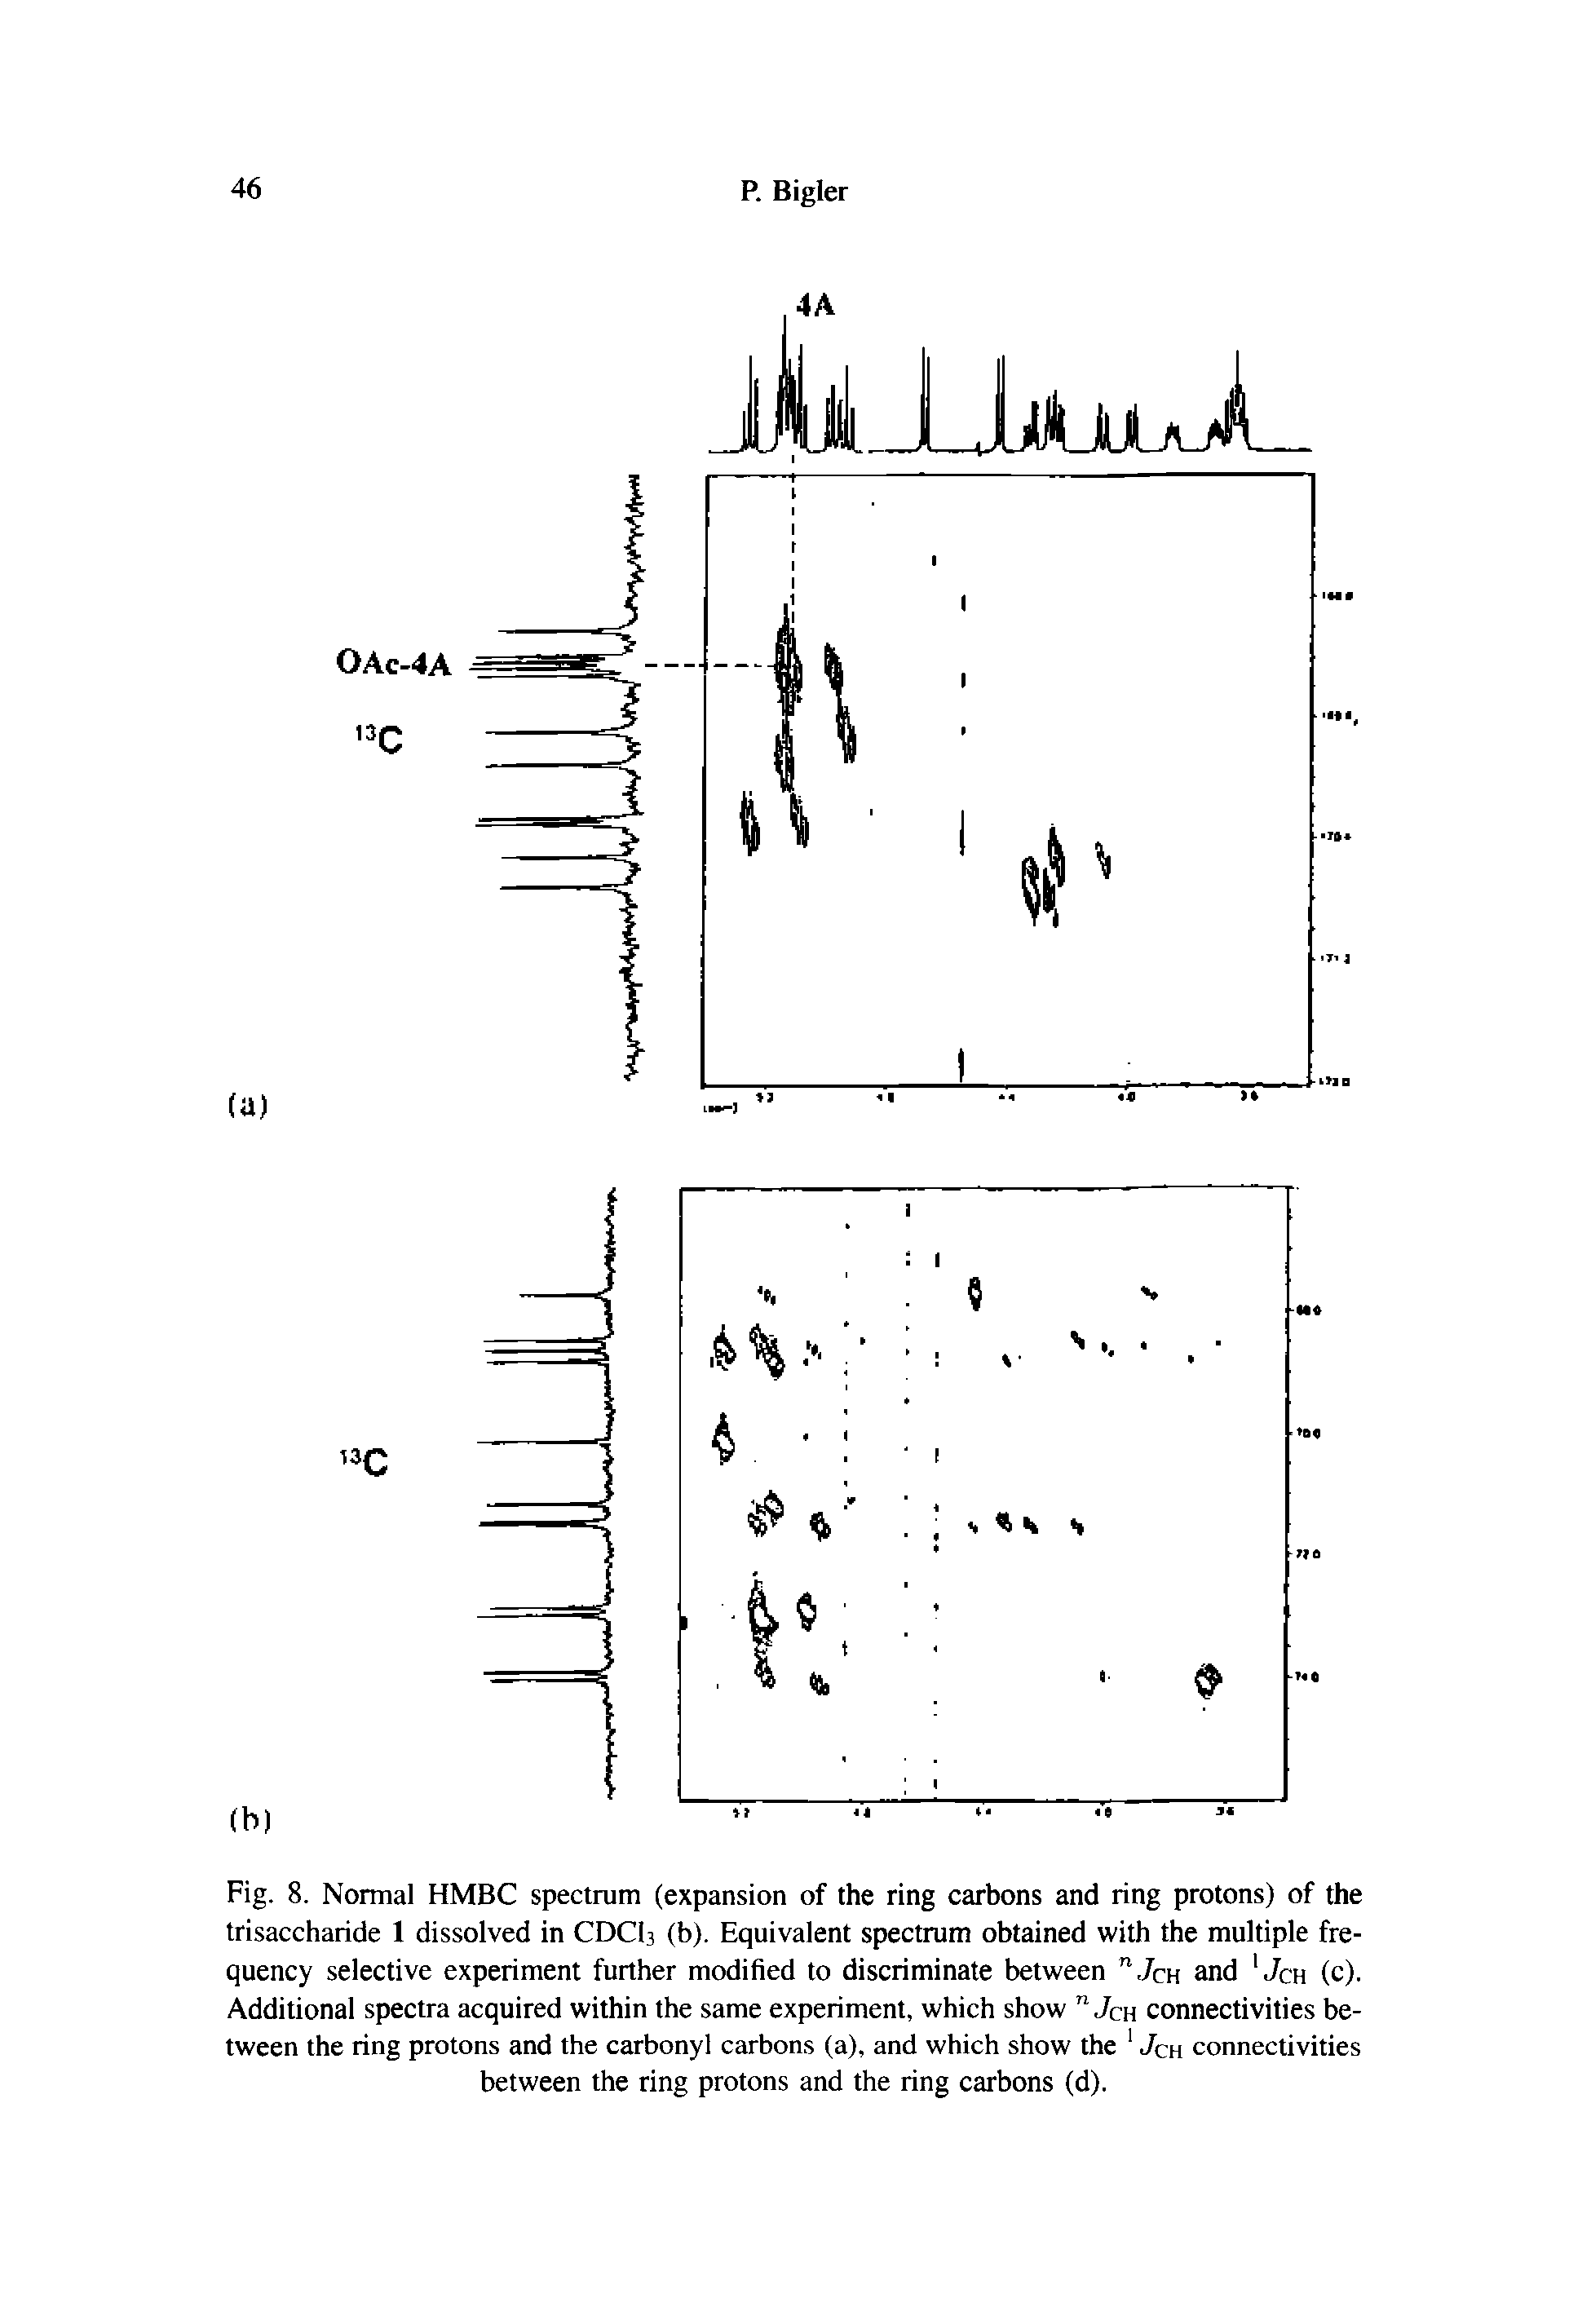 Fig. 8. Normal HMBC spectrum (expansion of the ring carbons and ring protons) of the trisaccharide 1 dissolved in CDCI3 (b). Equivalent spectrum obtained with the multiple frequency selective experiment further modified to discriminate between "Jch and Jch (c). Additional spectra acquired within the same experiment, which show Jch connectivities between the ring protons and the carbonyl carbons (a), and which show the Jch connectivities between the ring protons and the ring carbons (d).